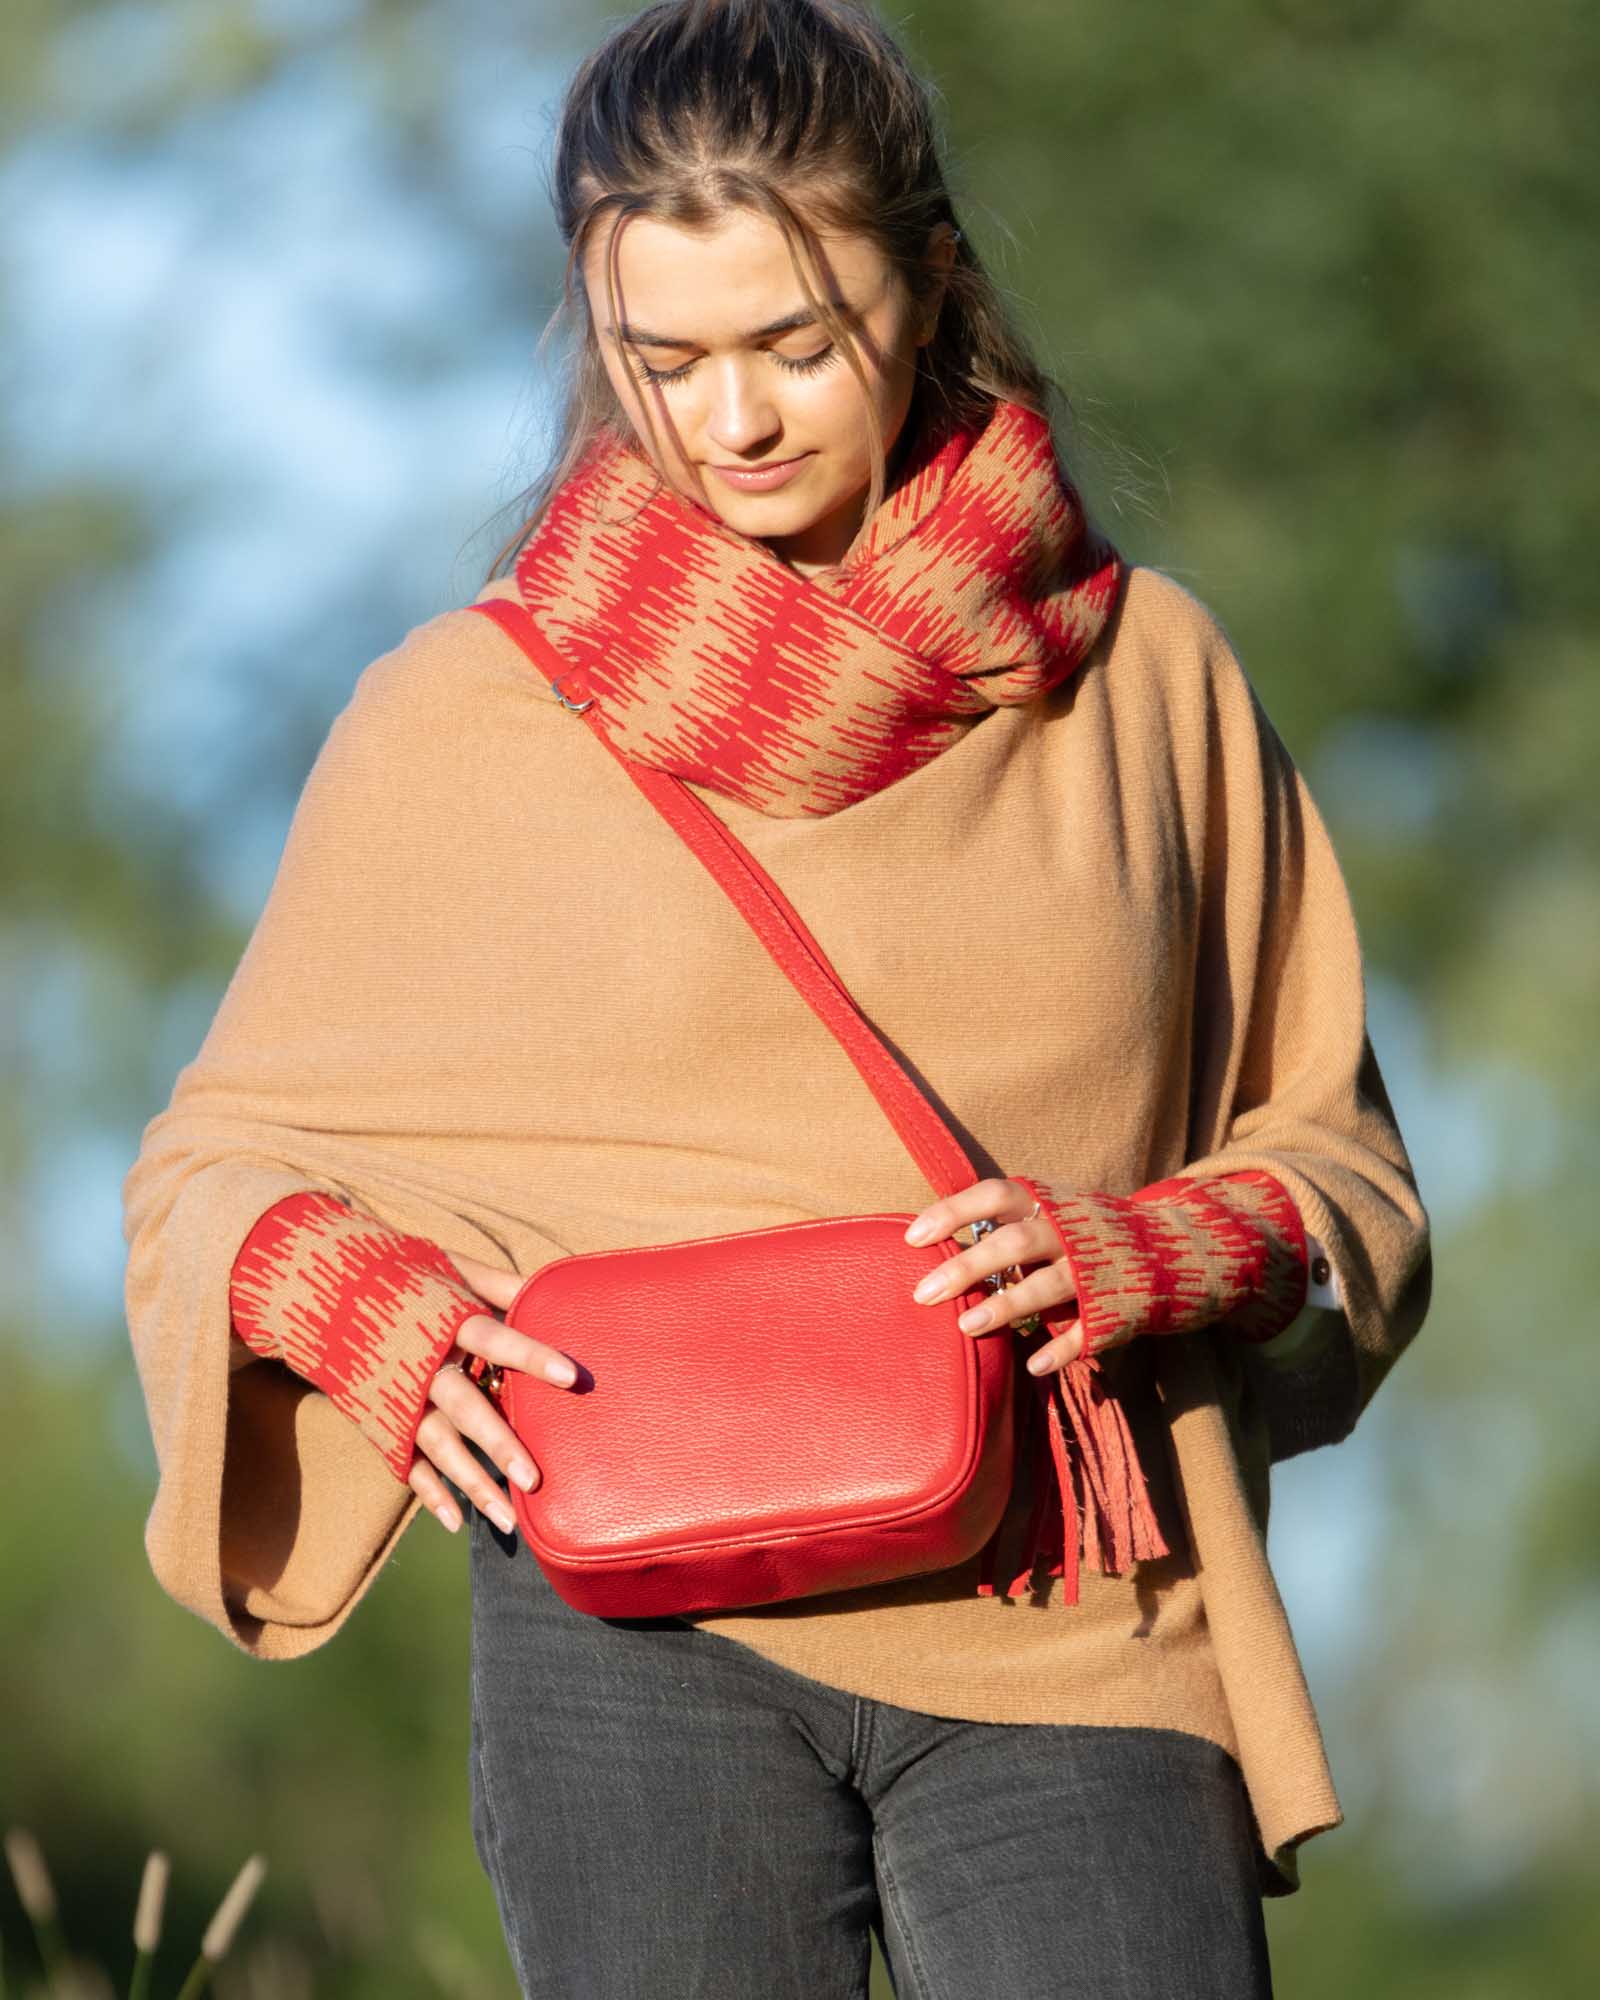 Cashmere Blend Wave Snood Venetian Red and Camel